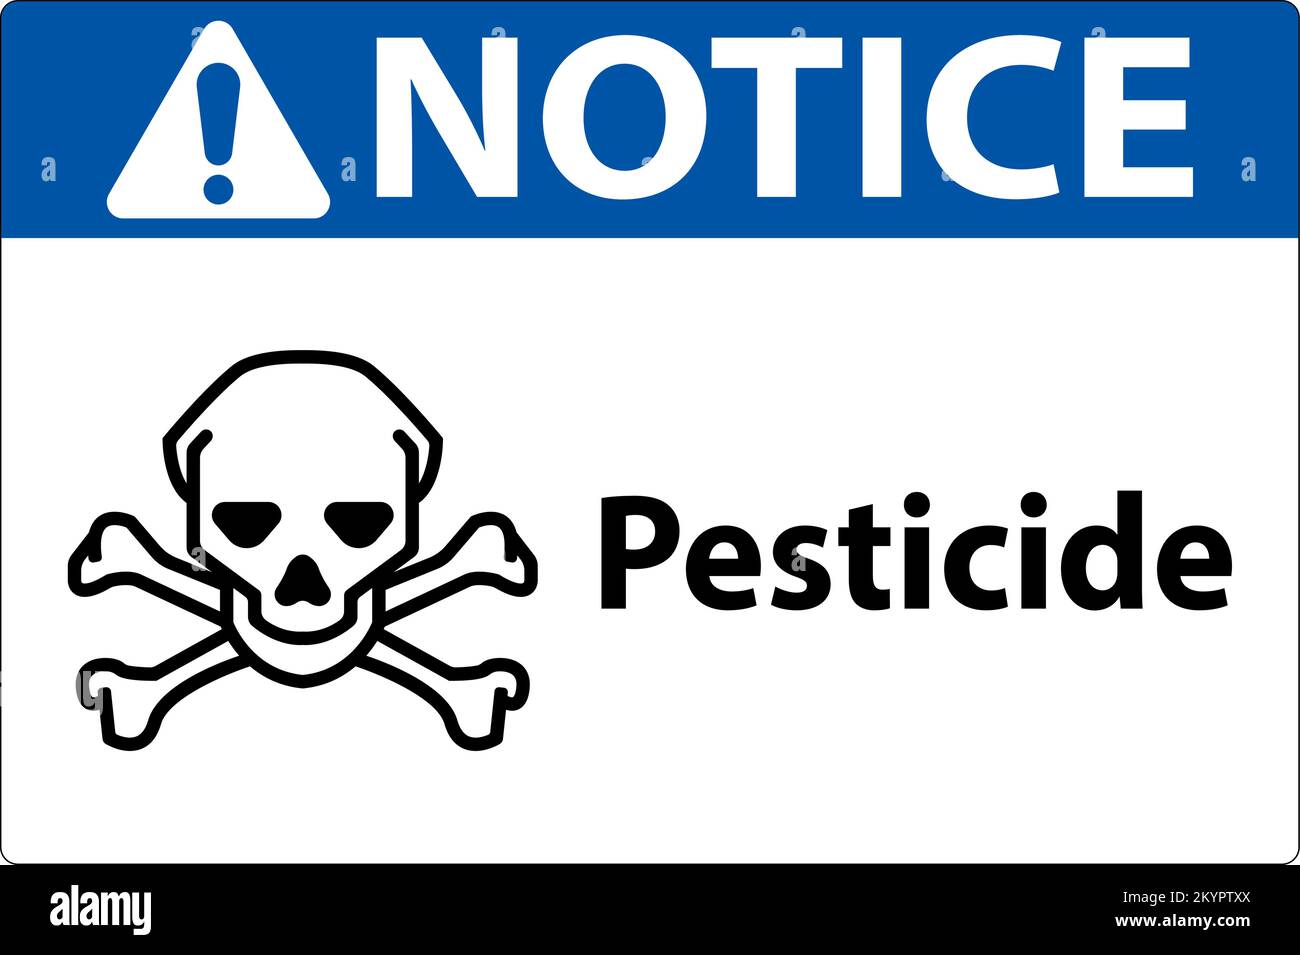 Notice Pesticide Symbol Sign On White Background Stock Vector